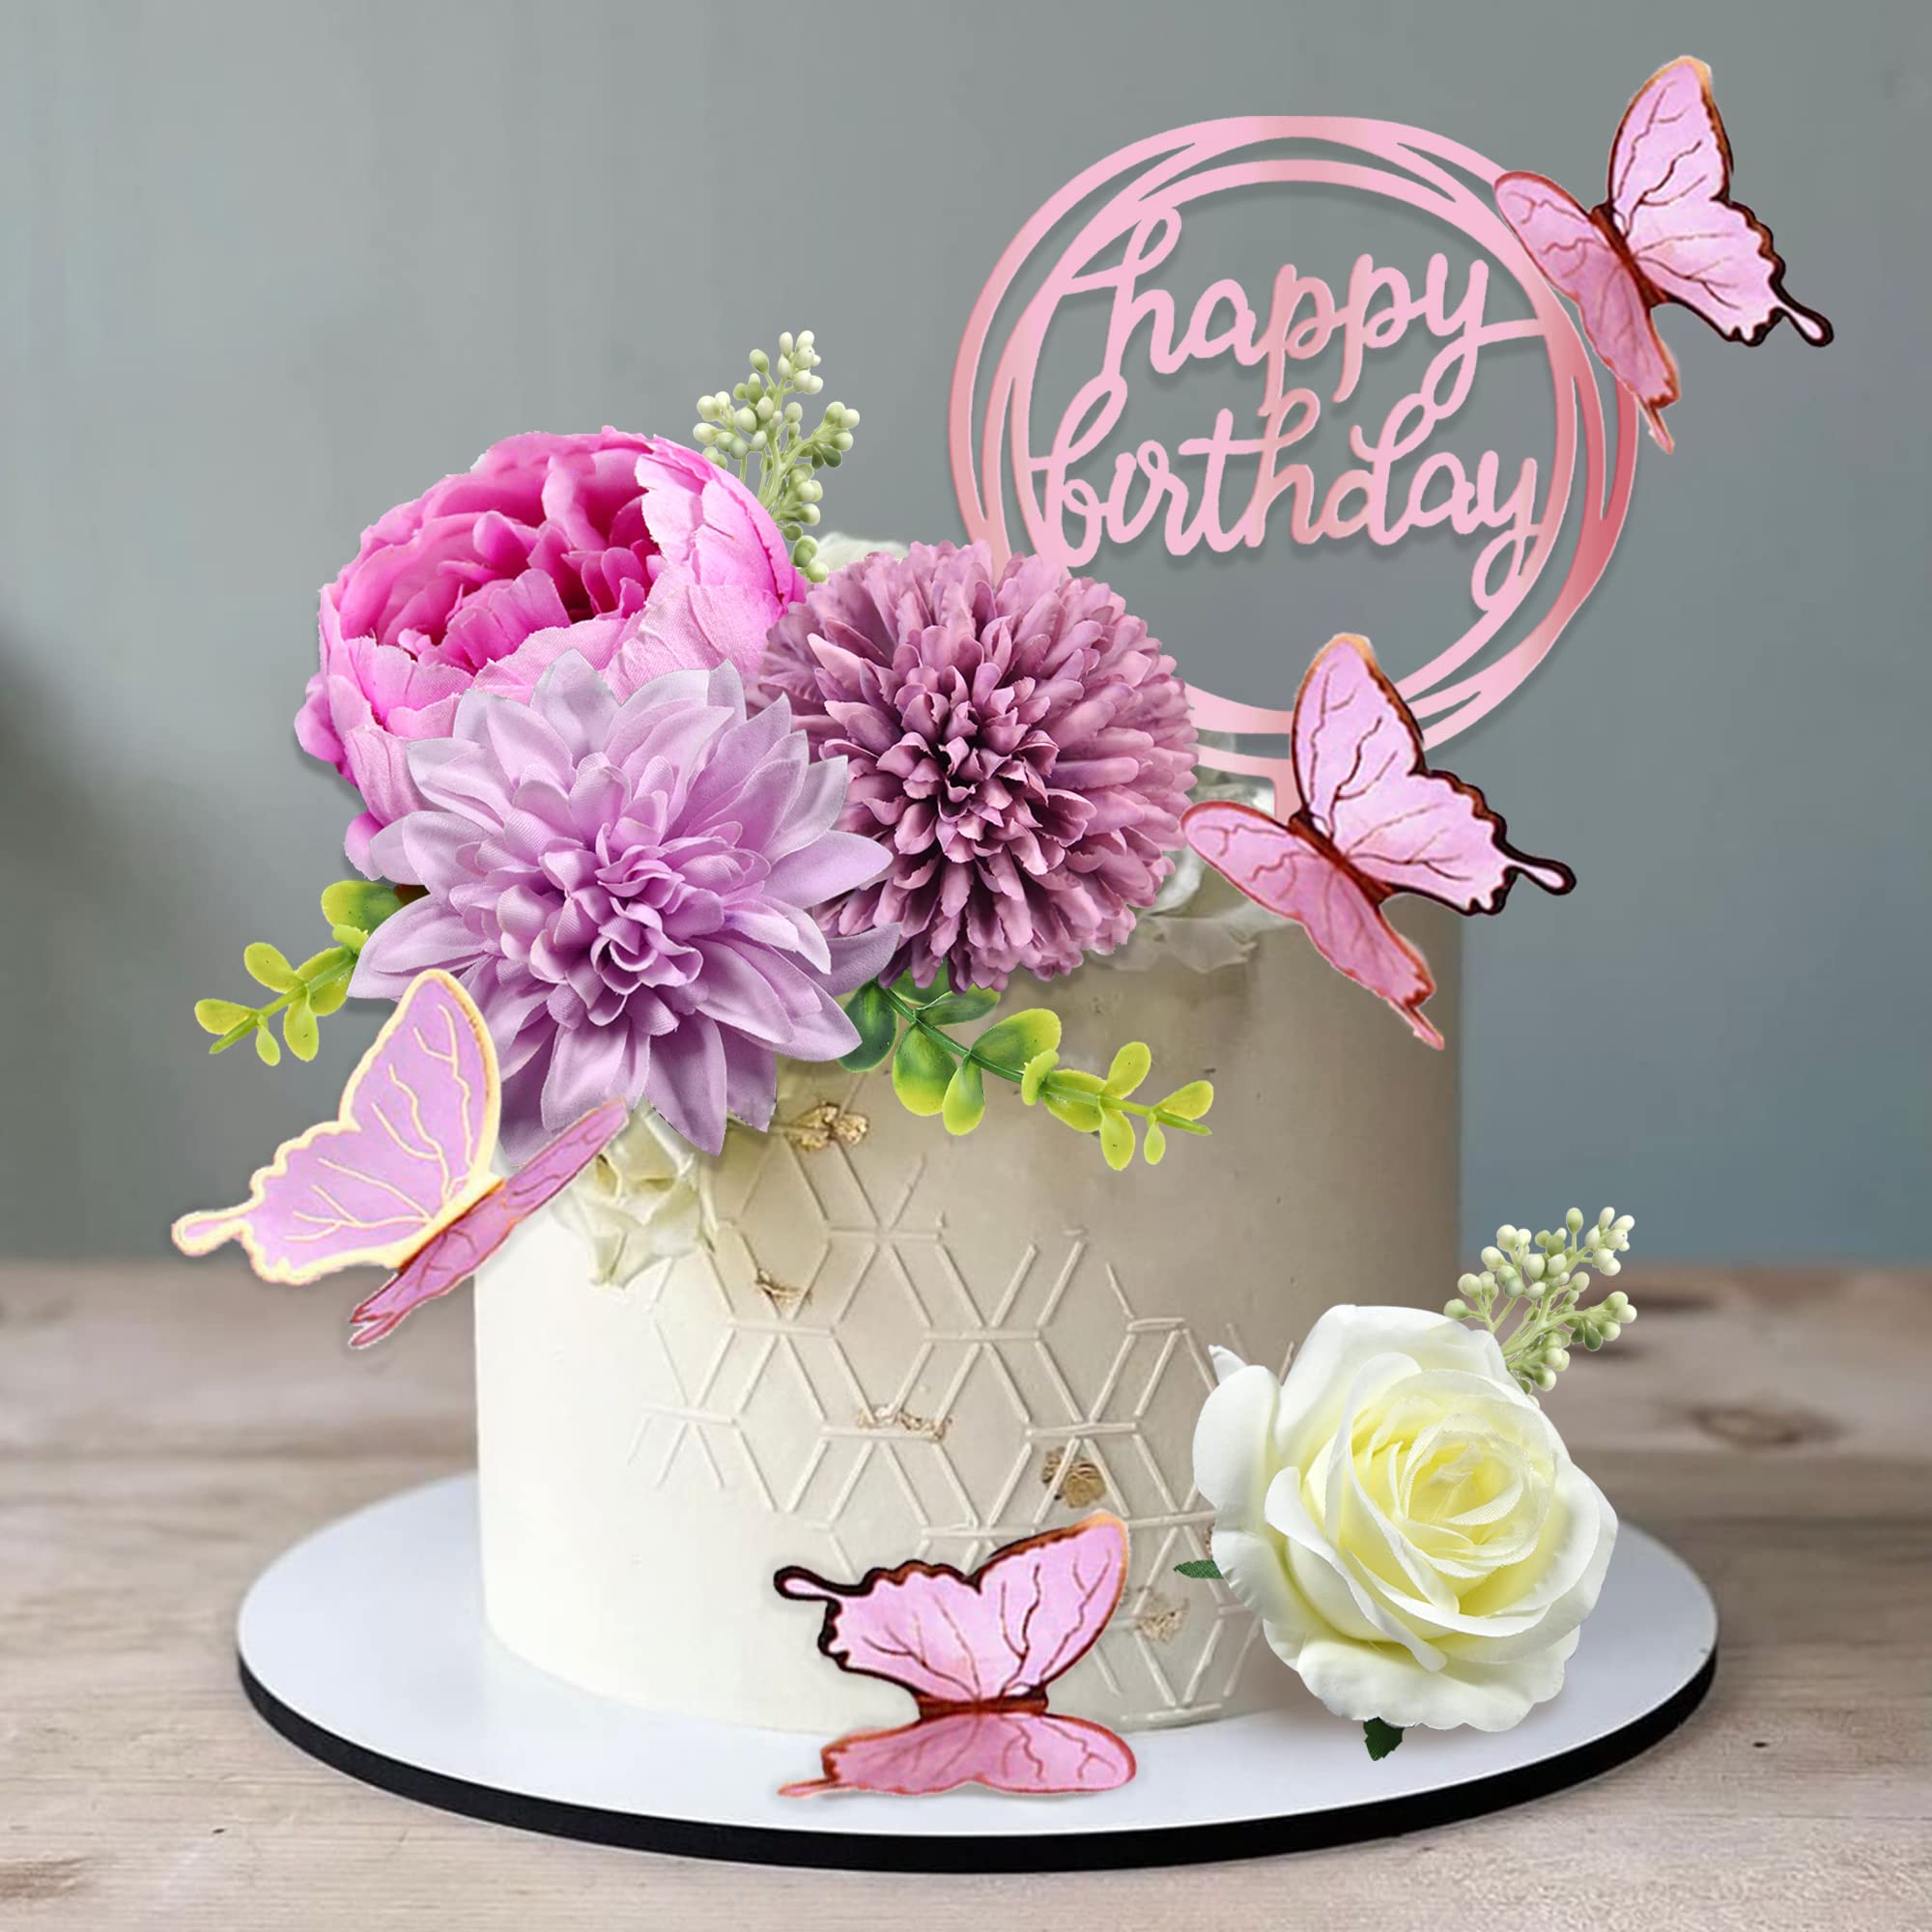 It's Your Happy Birthday Flower Cake at From You Flowers